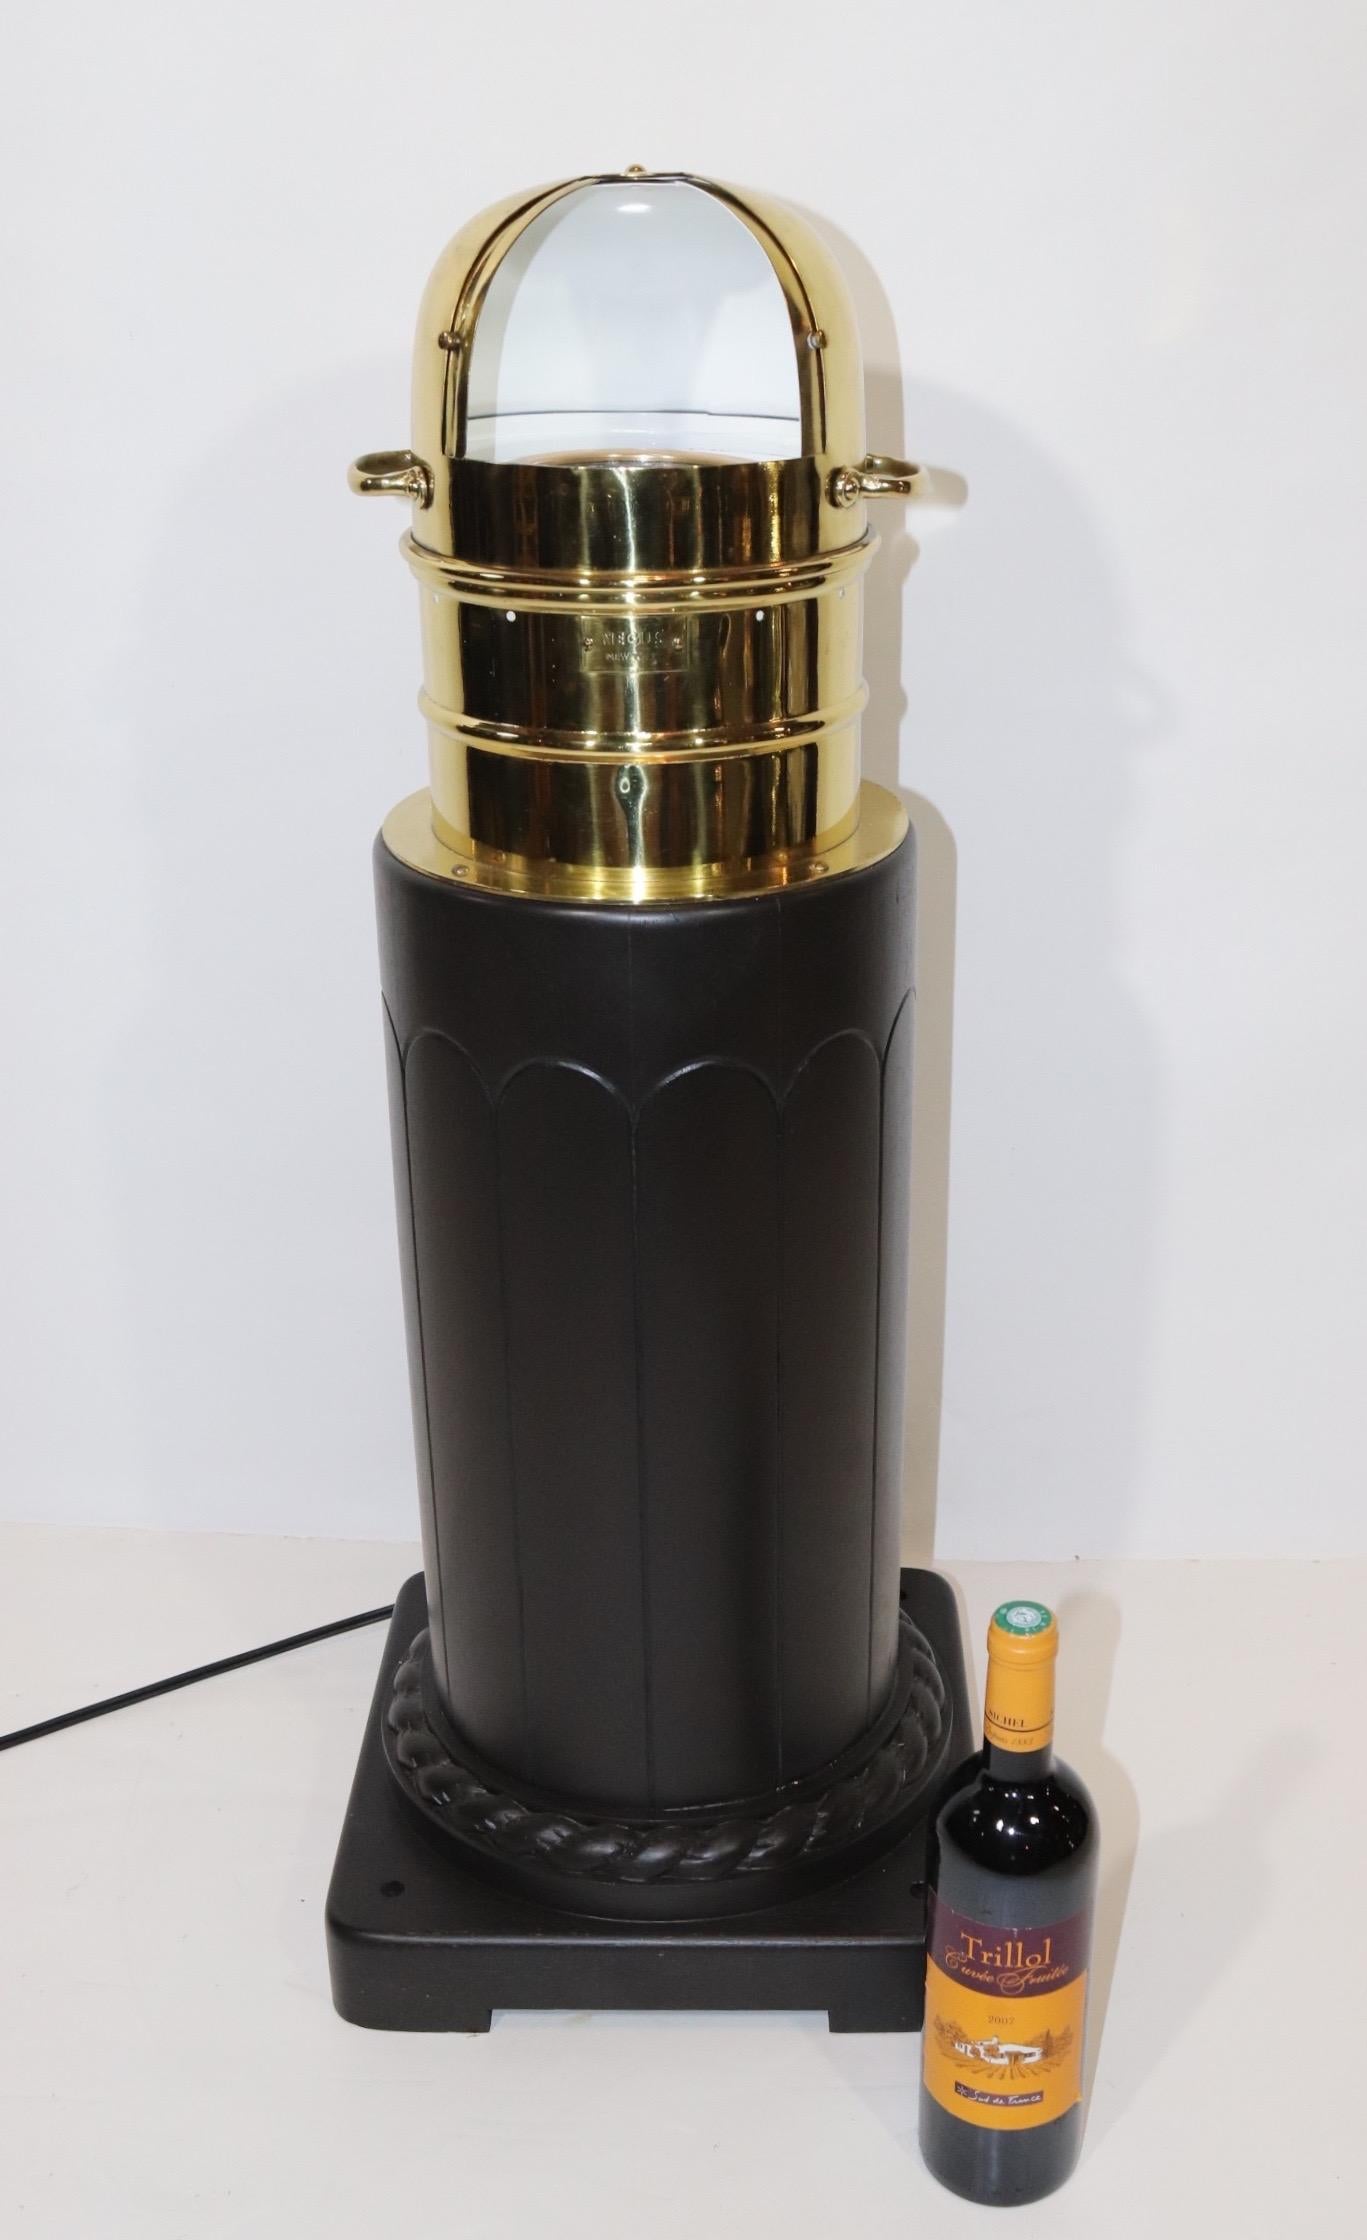 Choice solid brass polished and lacquered yacht binnacle from circa 1930. Mounted to a custom made pedestal with rope carving at the base. Brass binnacle shroud has a mounted name plate from ship chandler Negus of New York. Interior is painted white